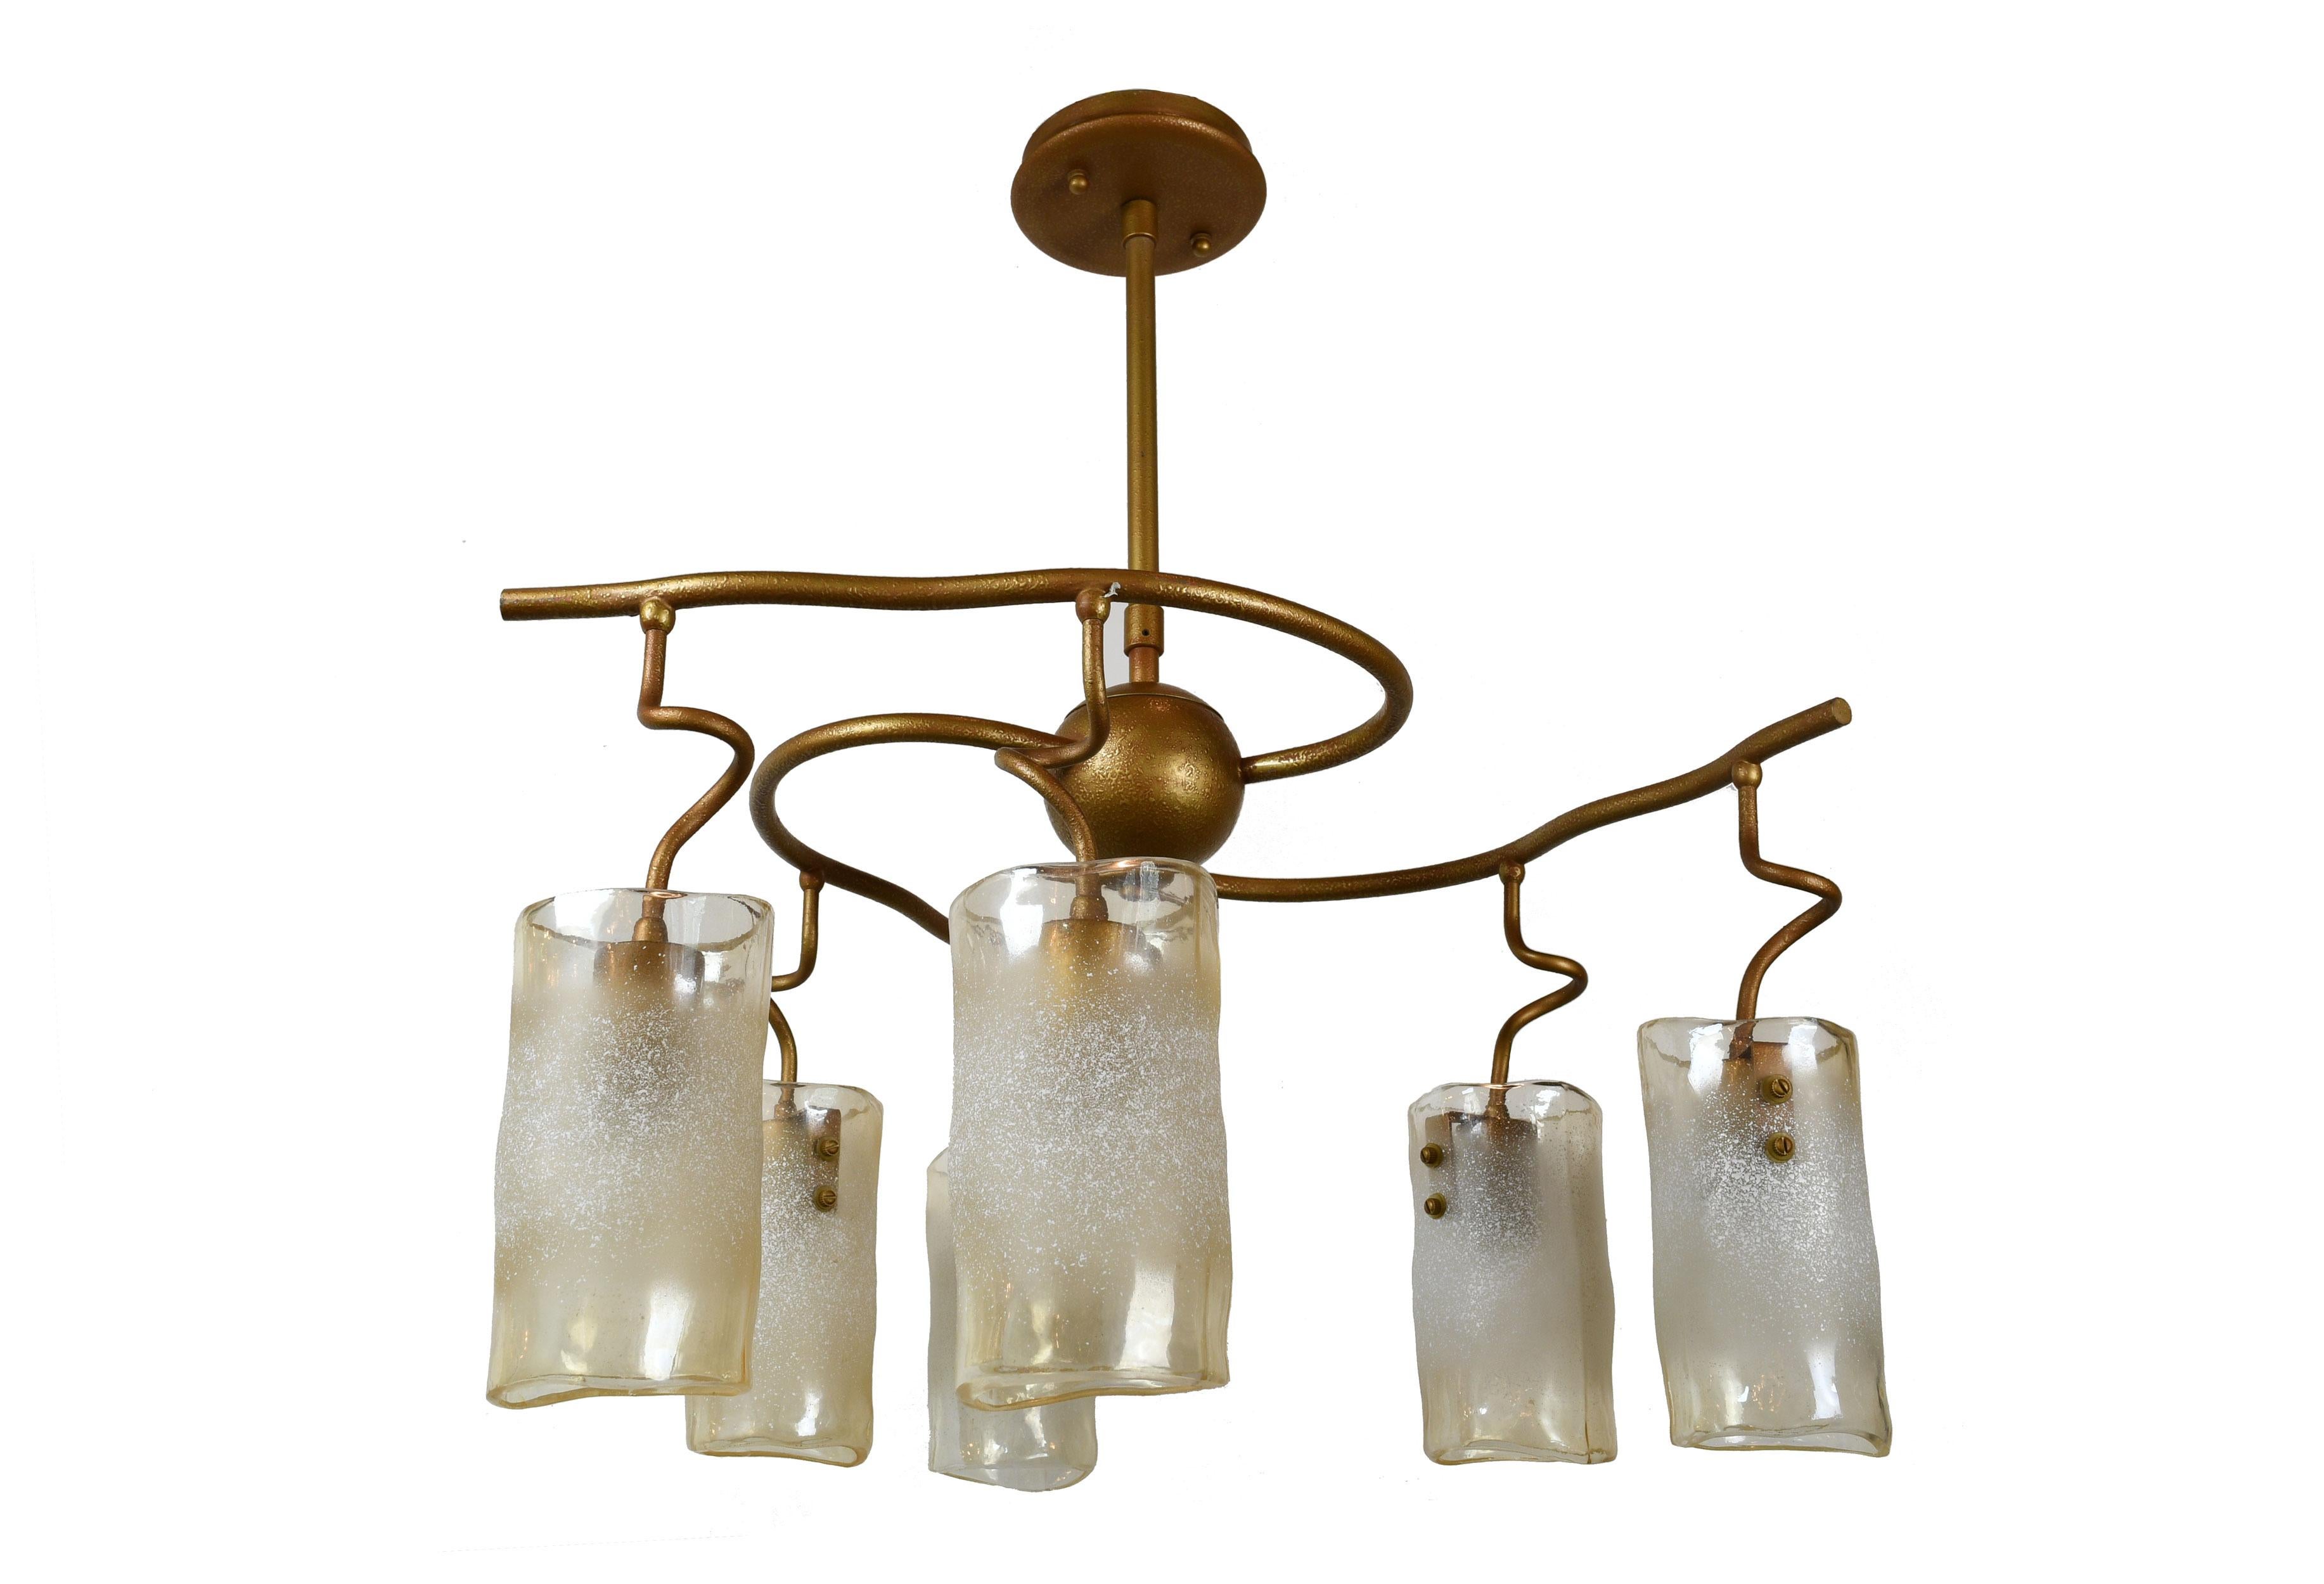 This organic fixture features 3 curvilinear arms swirling, reaching out from a central golden orb. Each arm holds two white speckled and cylindrical shades. This simple fixture is given life in the spirals of the arms and the palpable flow of the